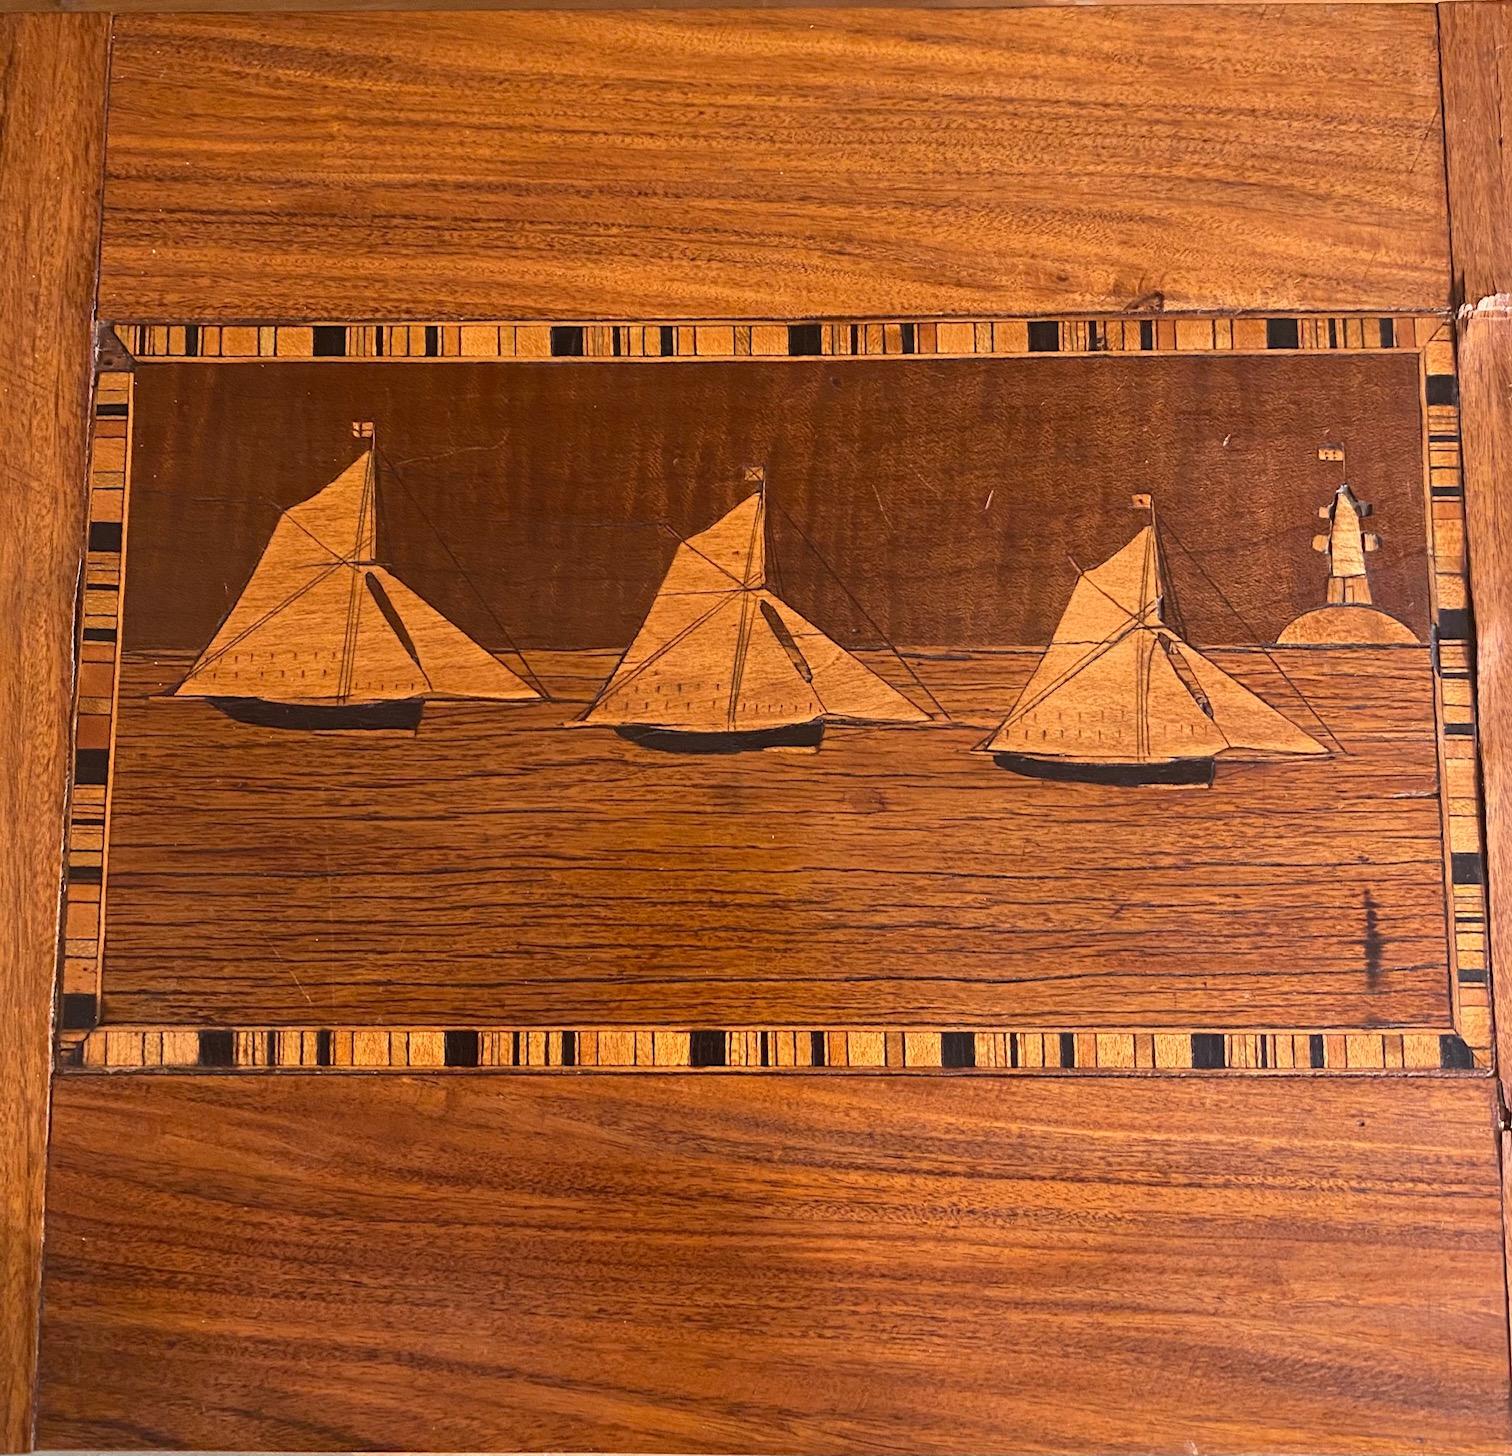 Fine 19th century trinity house marquetry inlaid rosewood sewing box, circa 1870, made by a Trinity House Lighthouse Keeper or sailor aboard a Lightship for sale to passing ships. The rosewood box features marquetry inlaid cutter-rigged sloops